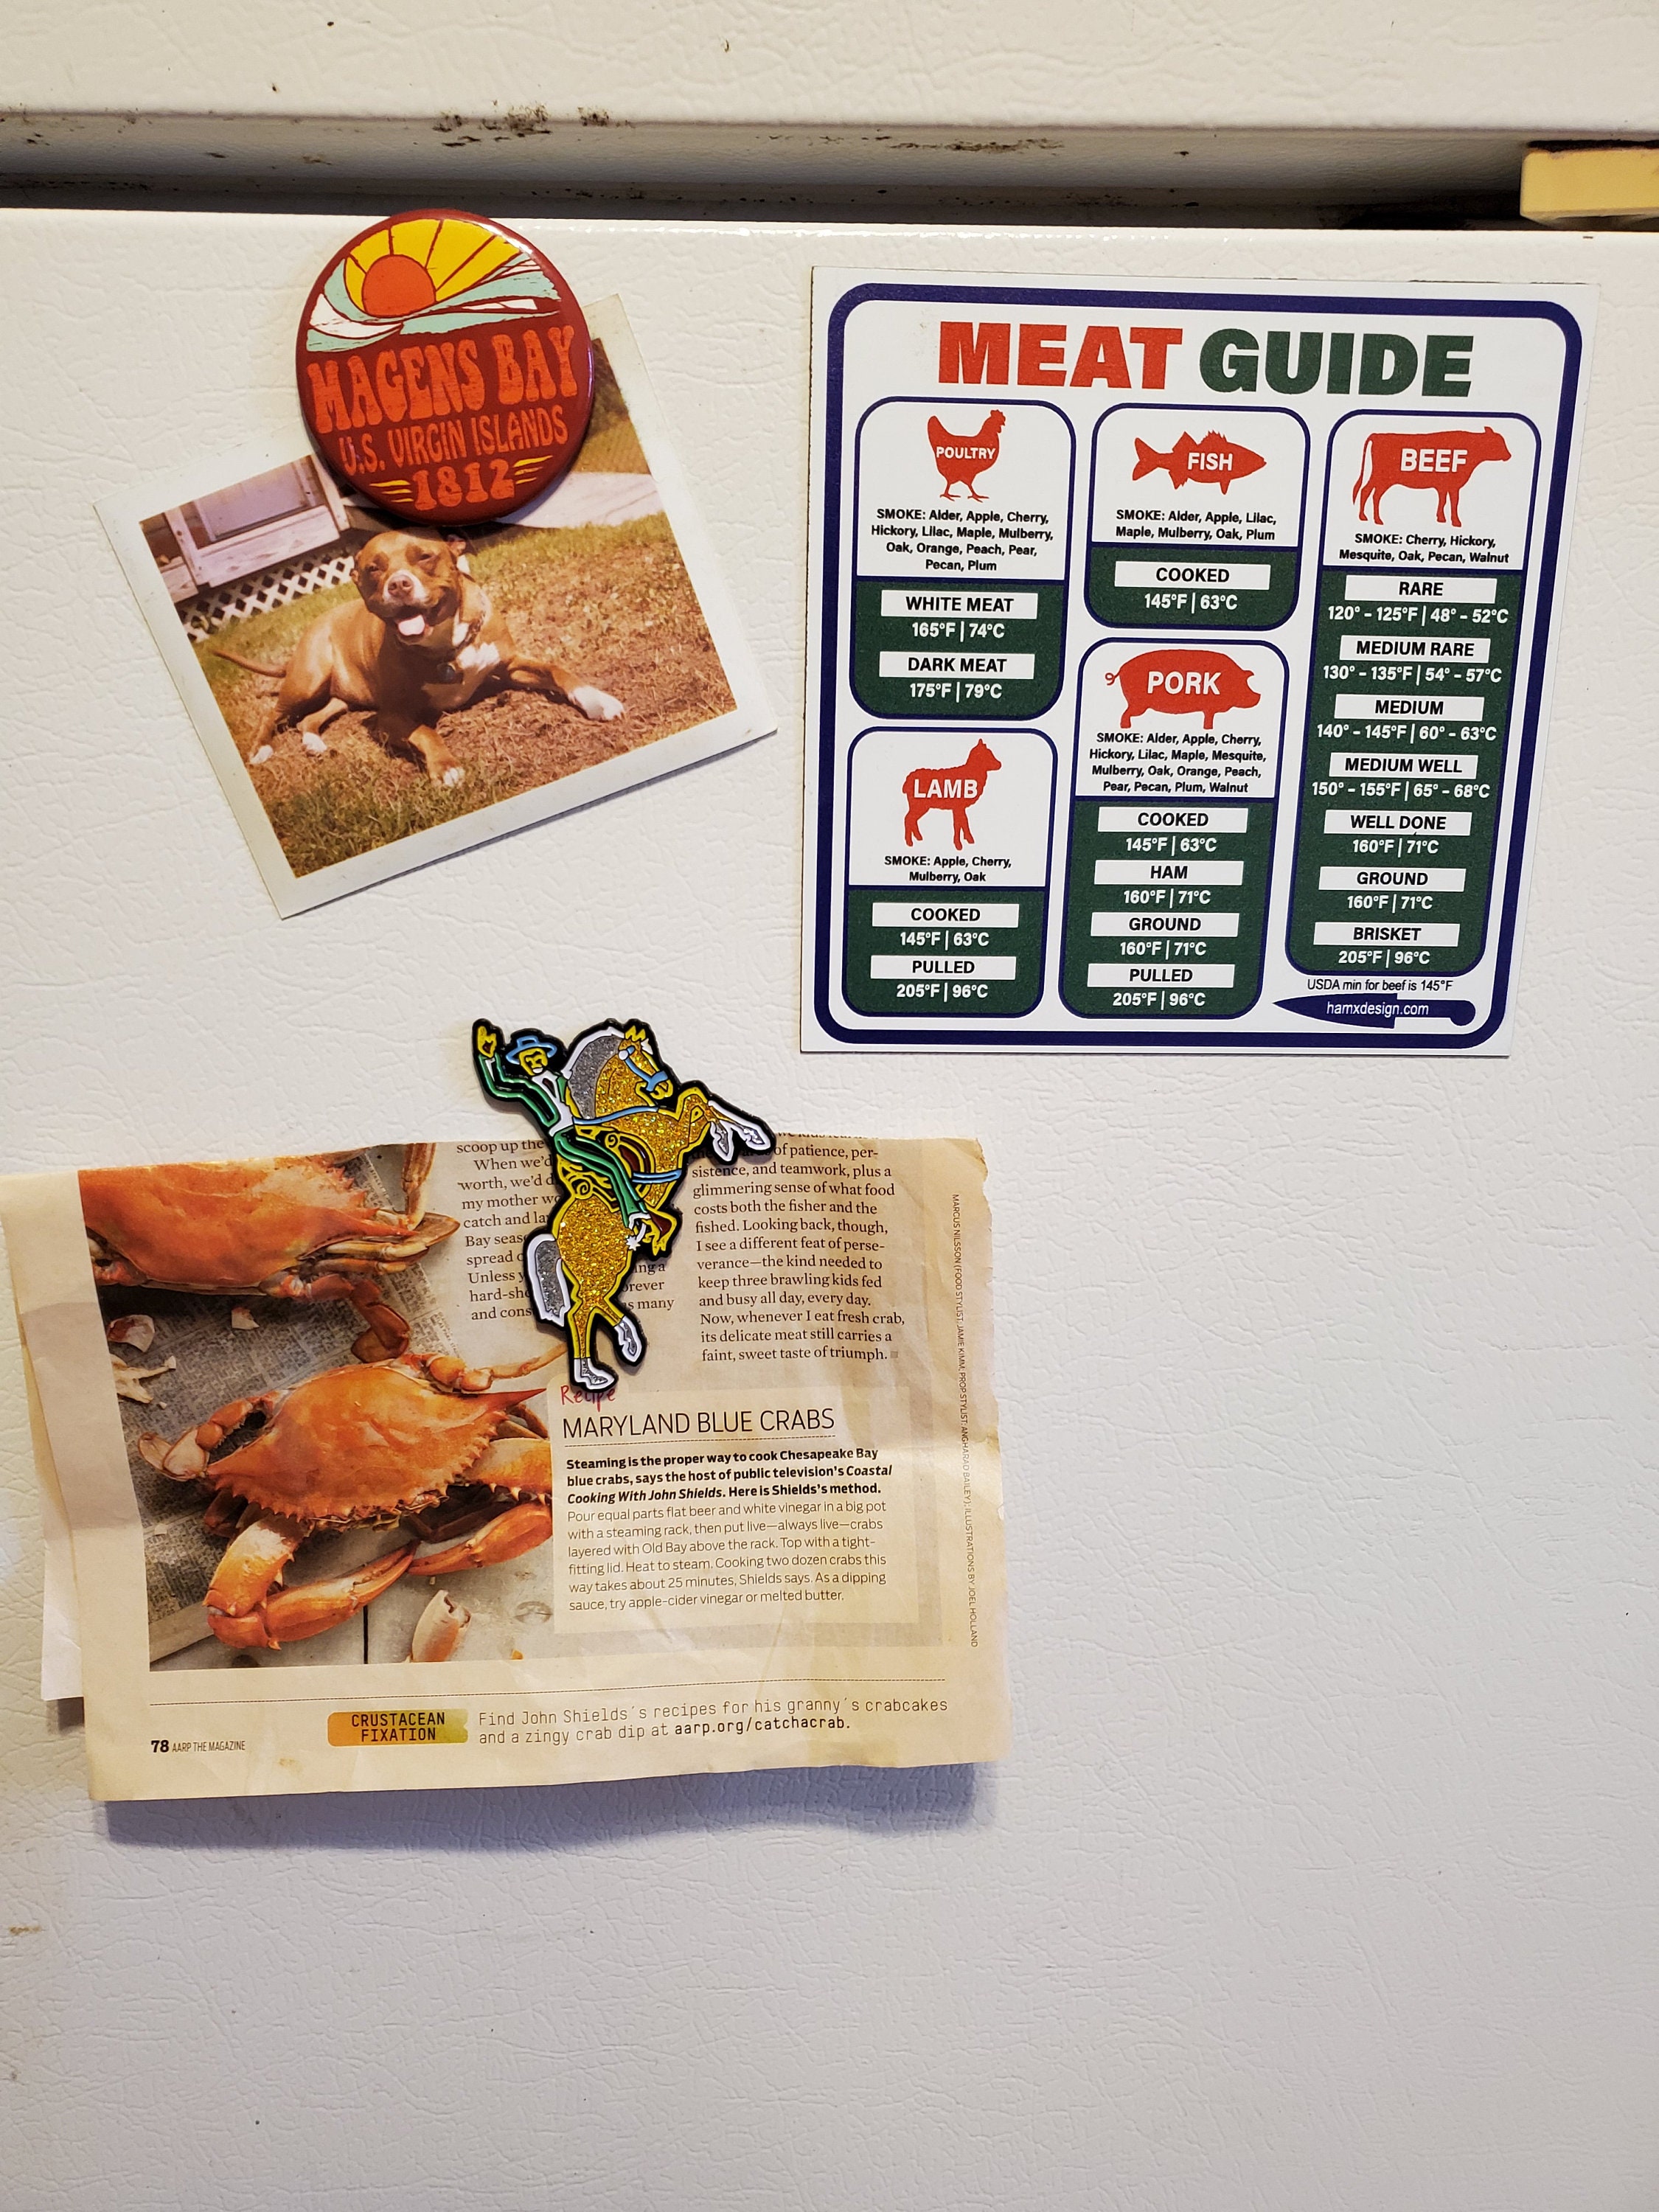 NEW ZEALAND - Smoke and Meat temperature guide Magnet – Ham's Designs